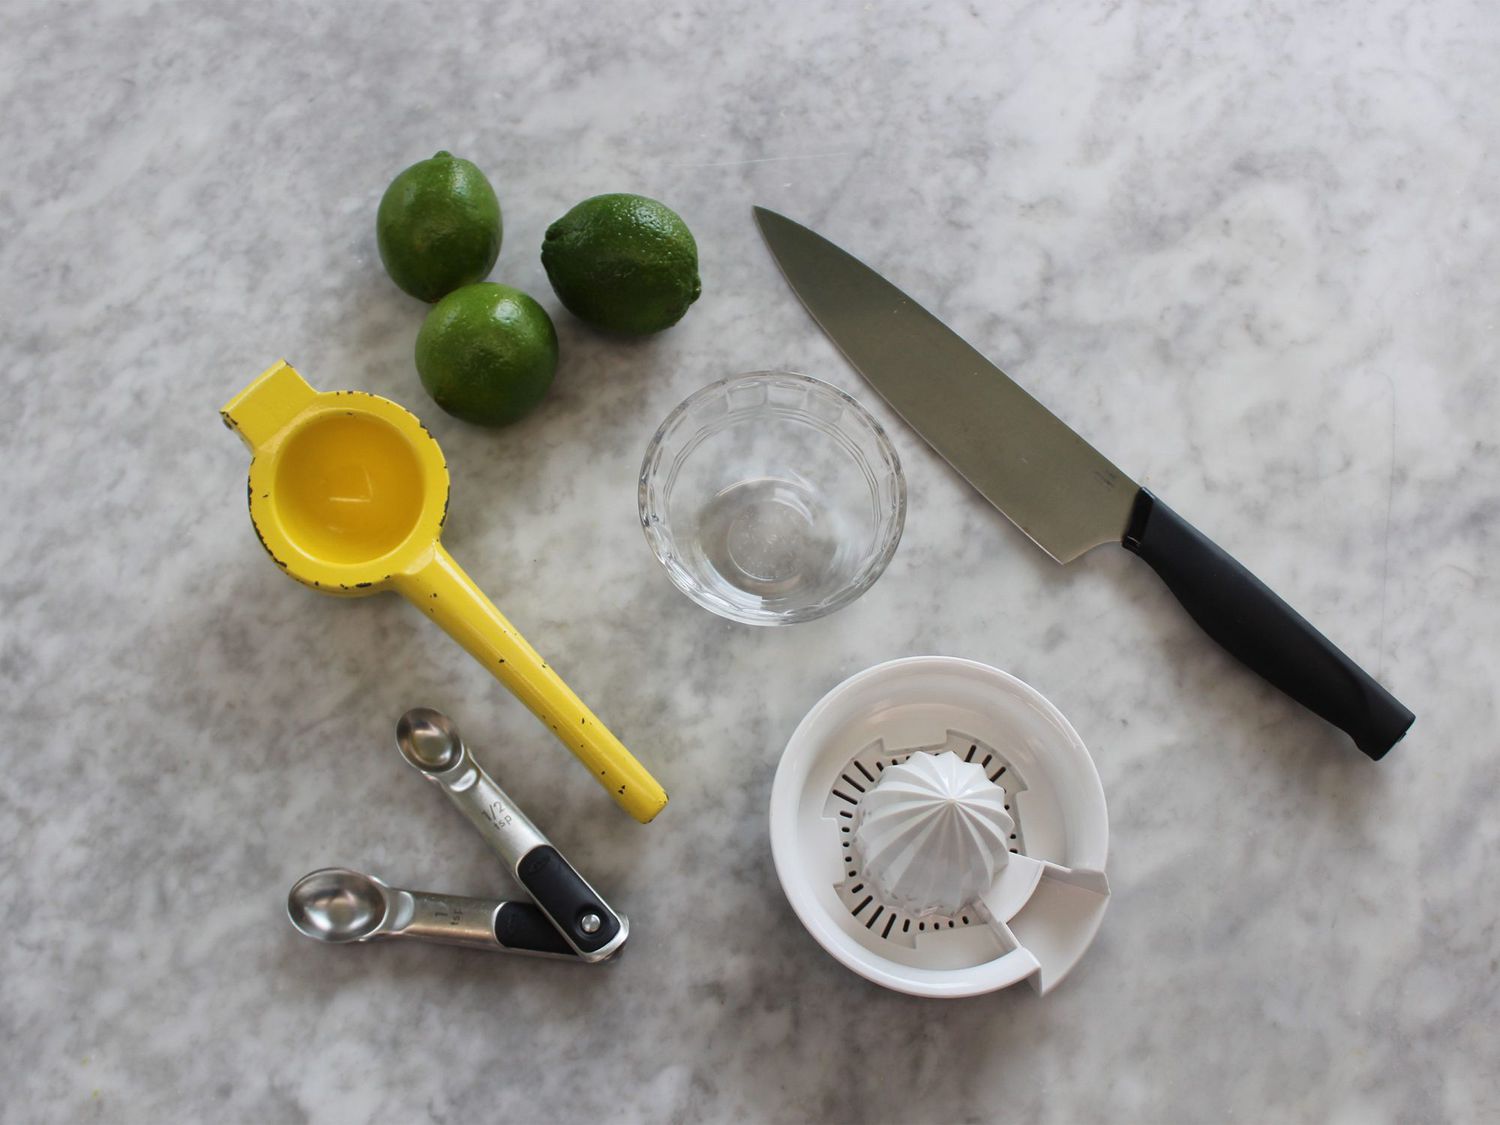 Limes, juicers, knife, bowl, and measuring spoons on countertop